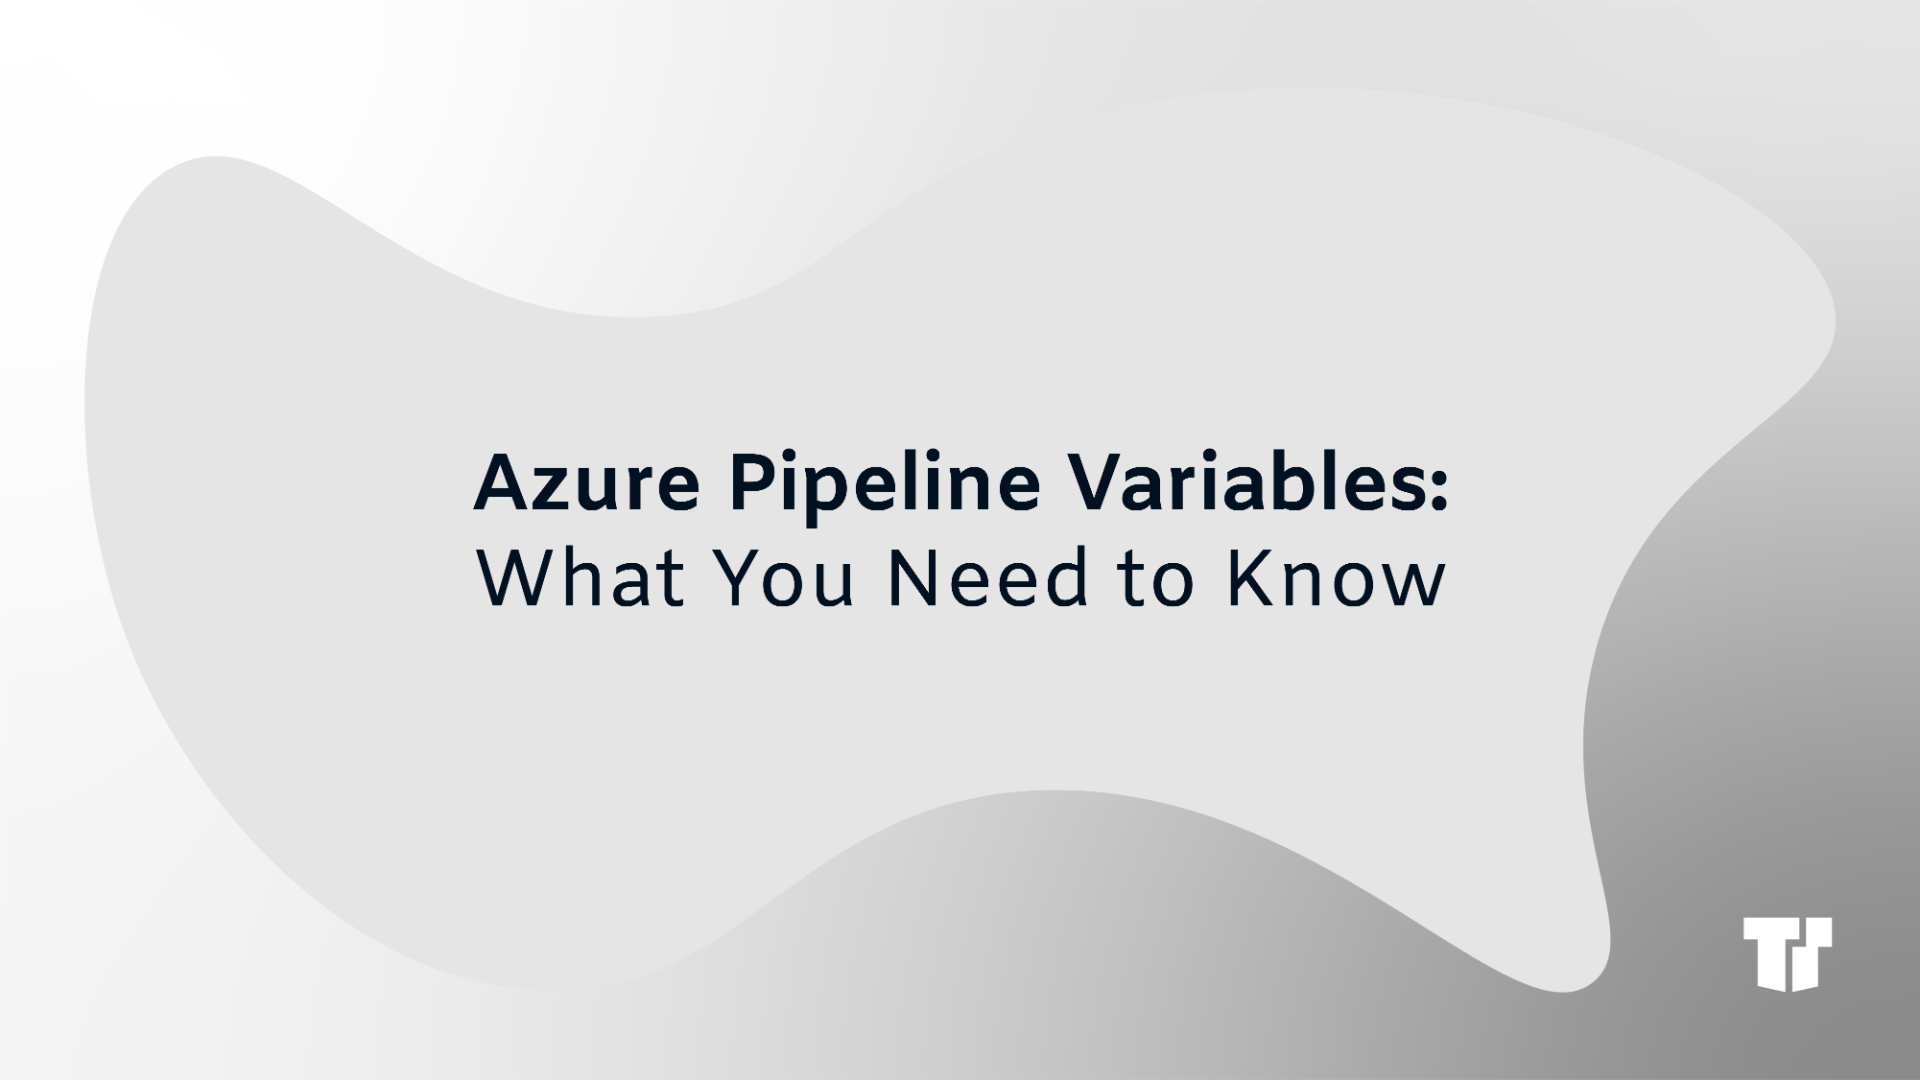 Azure Pipeline Variables: What You Need to Know cover image